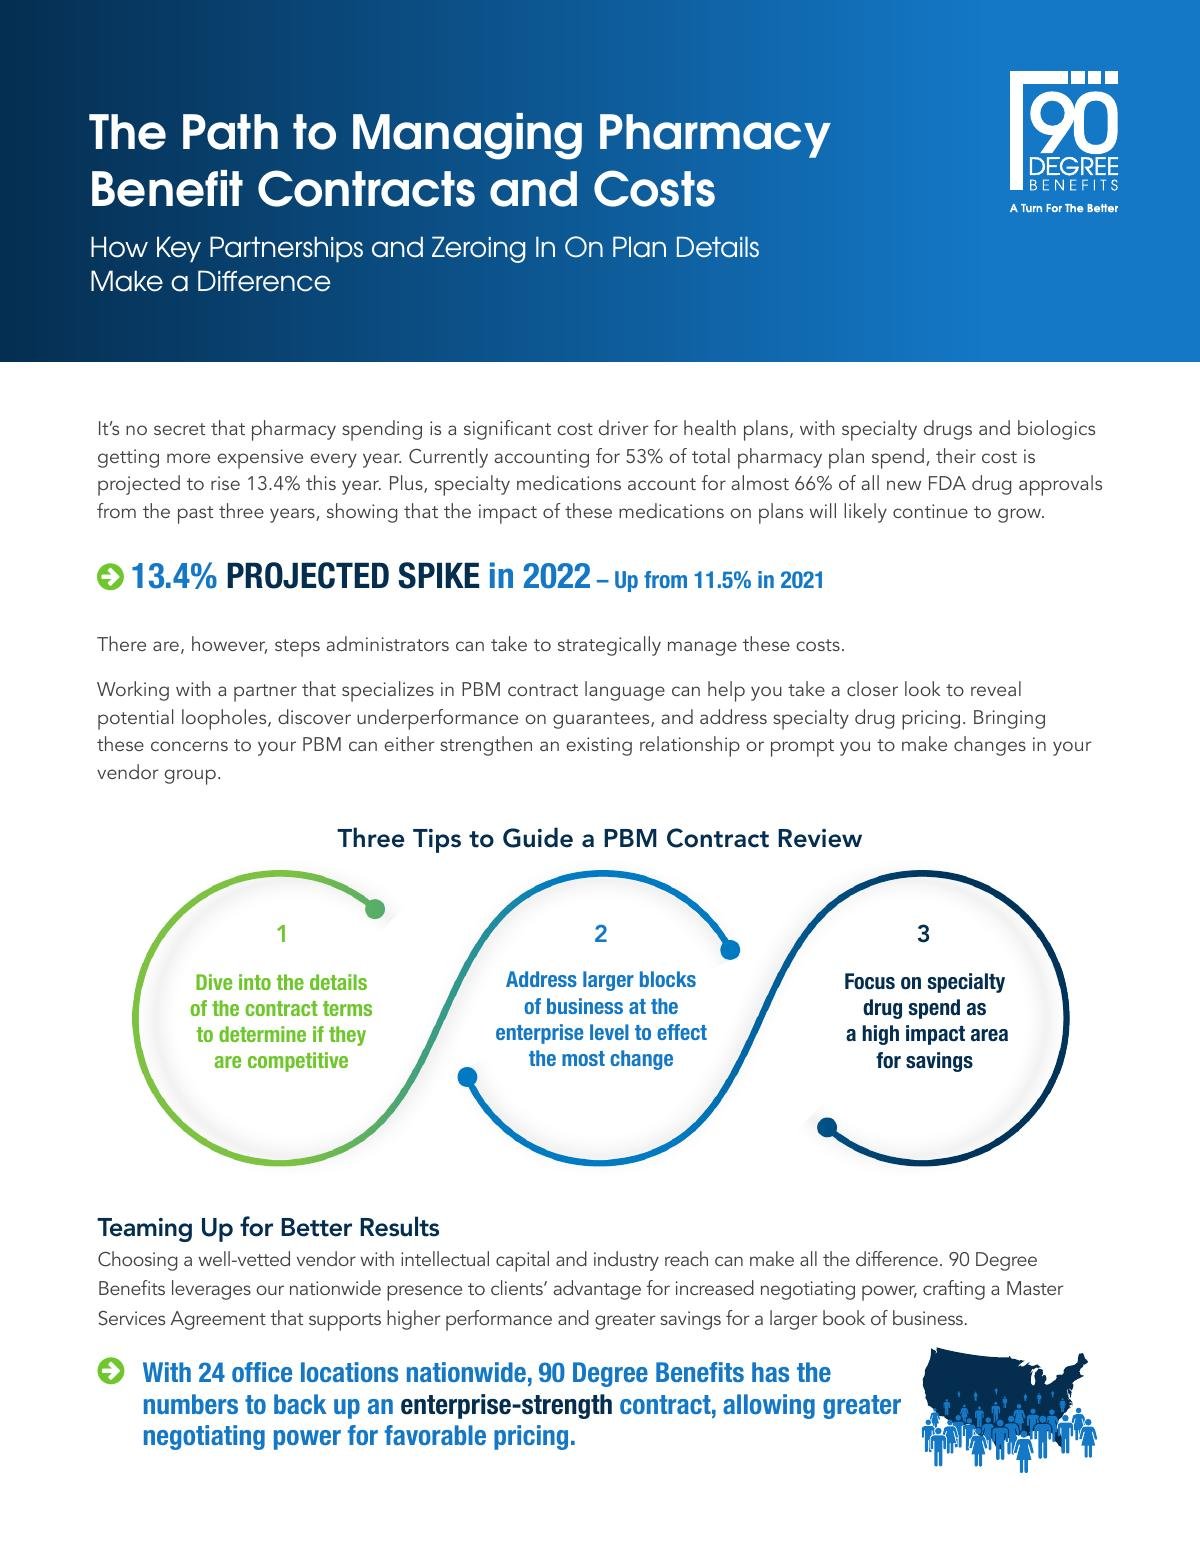 The Path to Managing Pharmacy Benefit Contracts and Costs